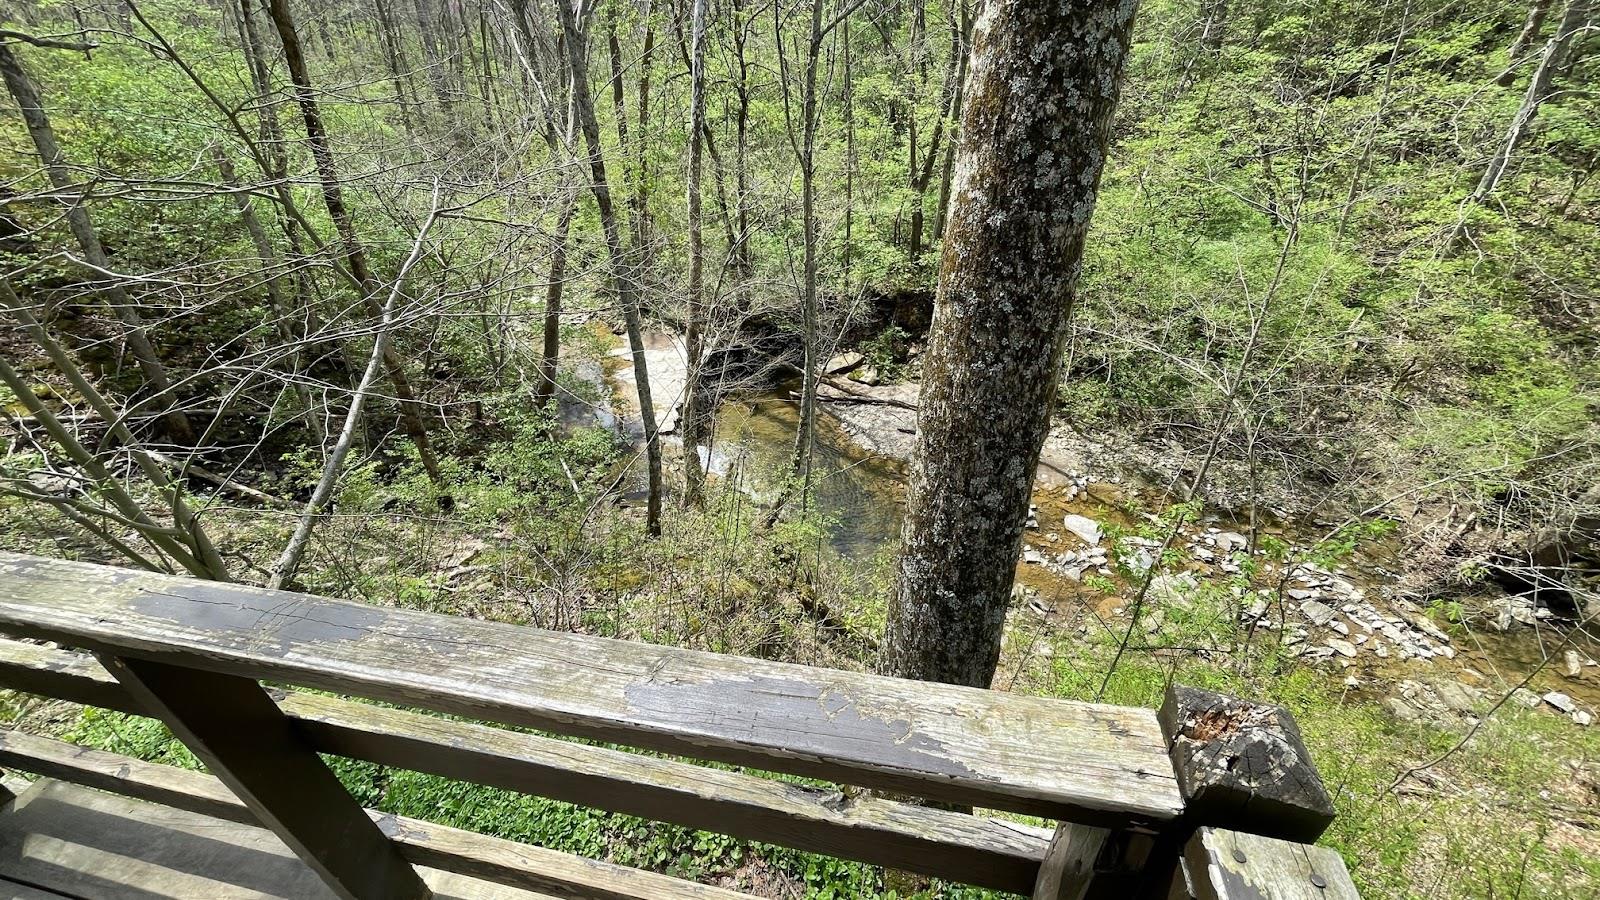 In the foreground is the wood decking overlooking the hill. In front of it is a young lichen covered tree. The perspective of the photo looks down through an early spring forest, before the trees have their leaves. Below the lookout, runs a stream. 